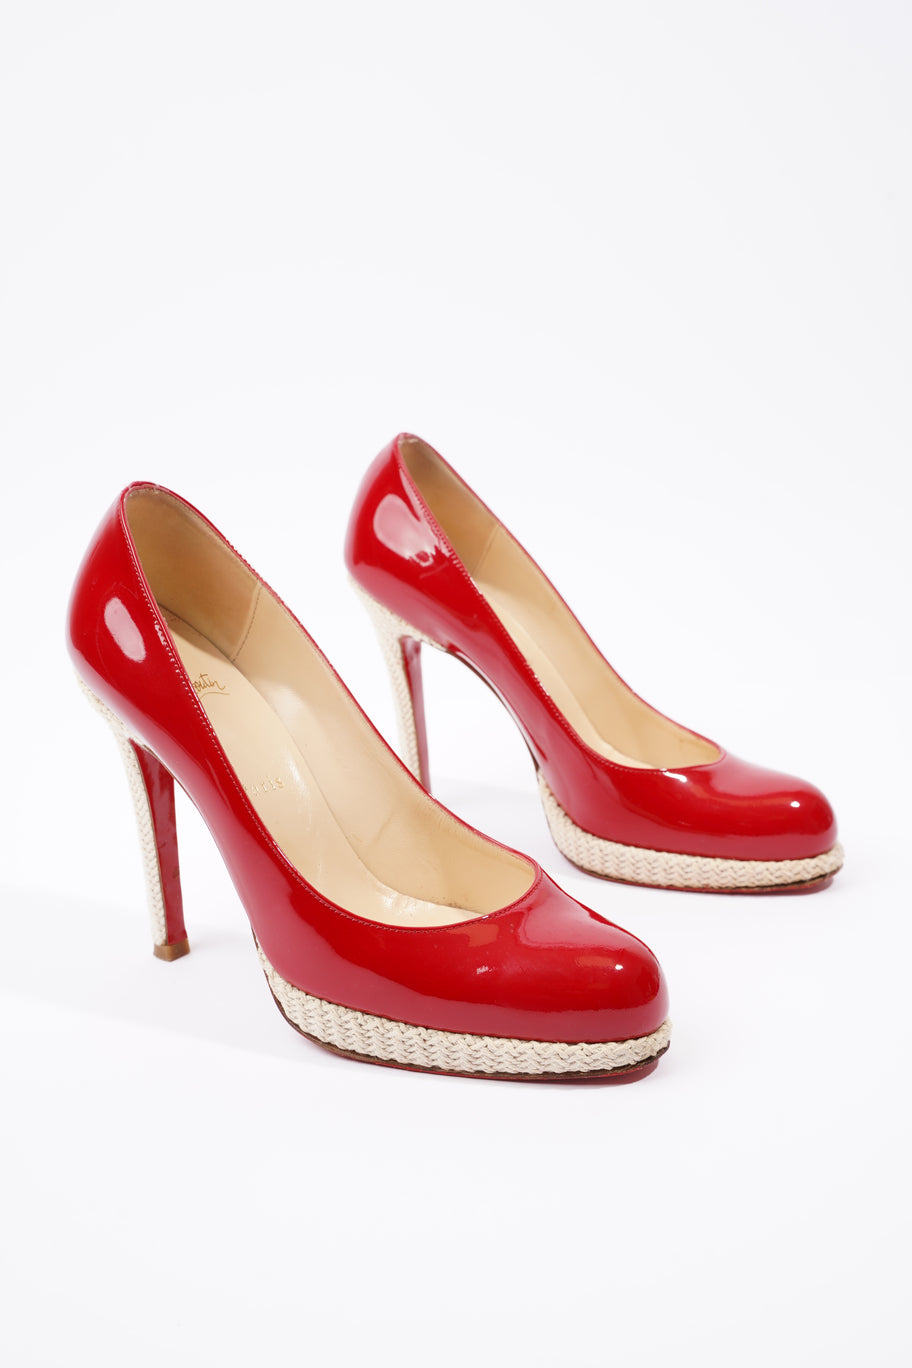 New Simple Pump 120 Red Patent Leather EU 39 UK 6 Image 3